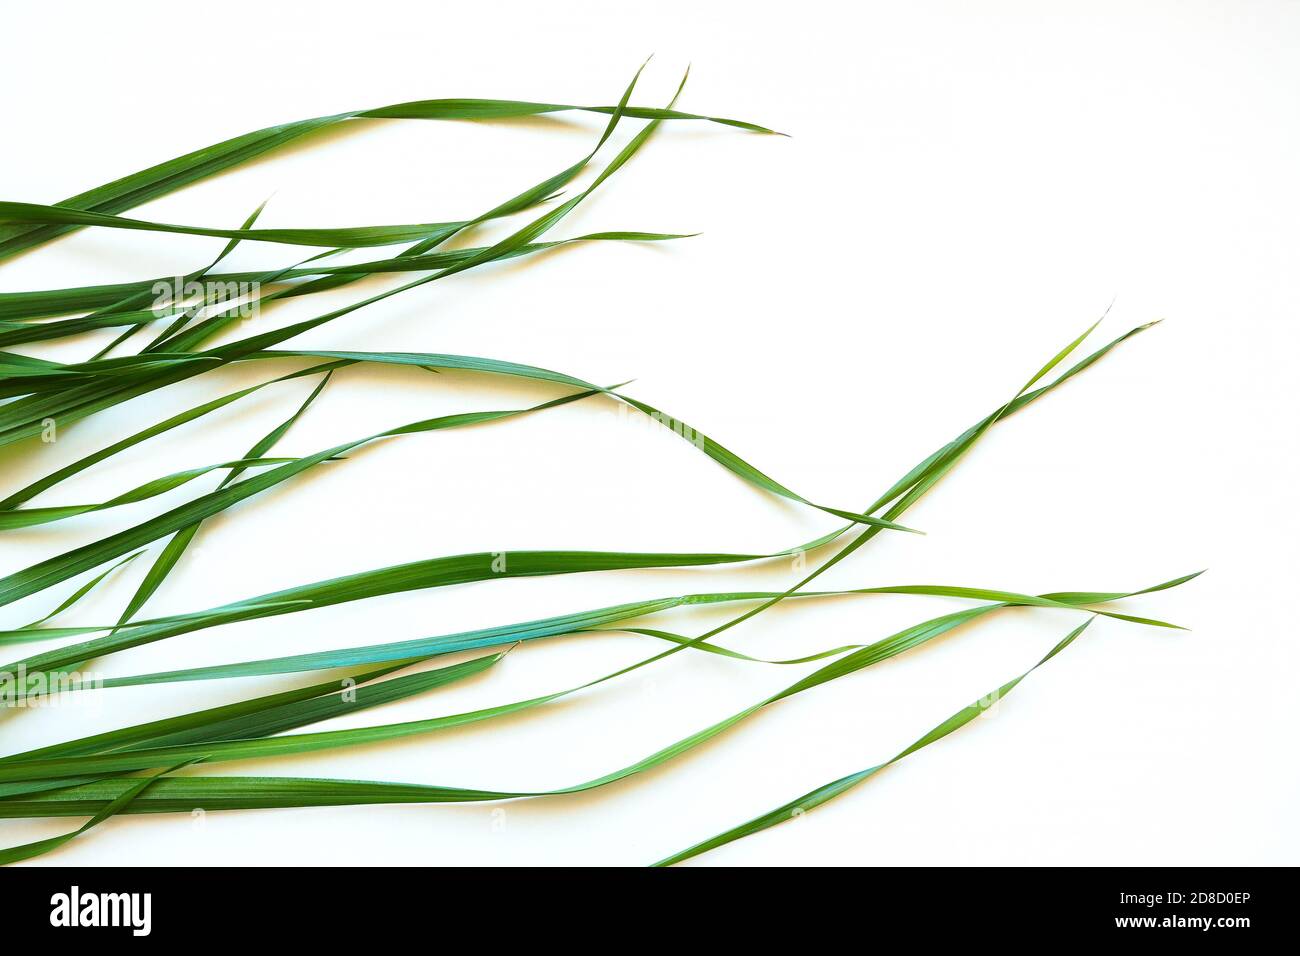 Top view of oat grass on white background. Young green leaves of Avena sativa Stock Photo